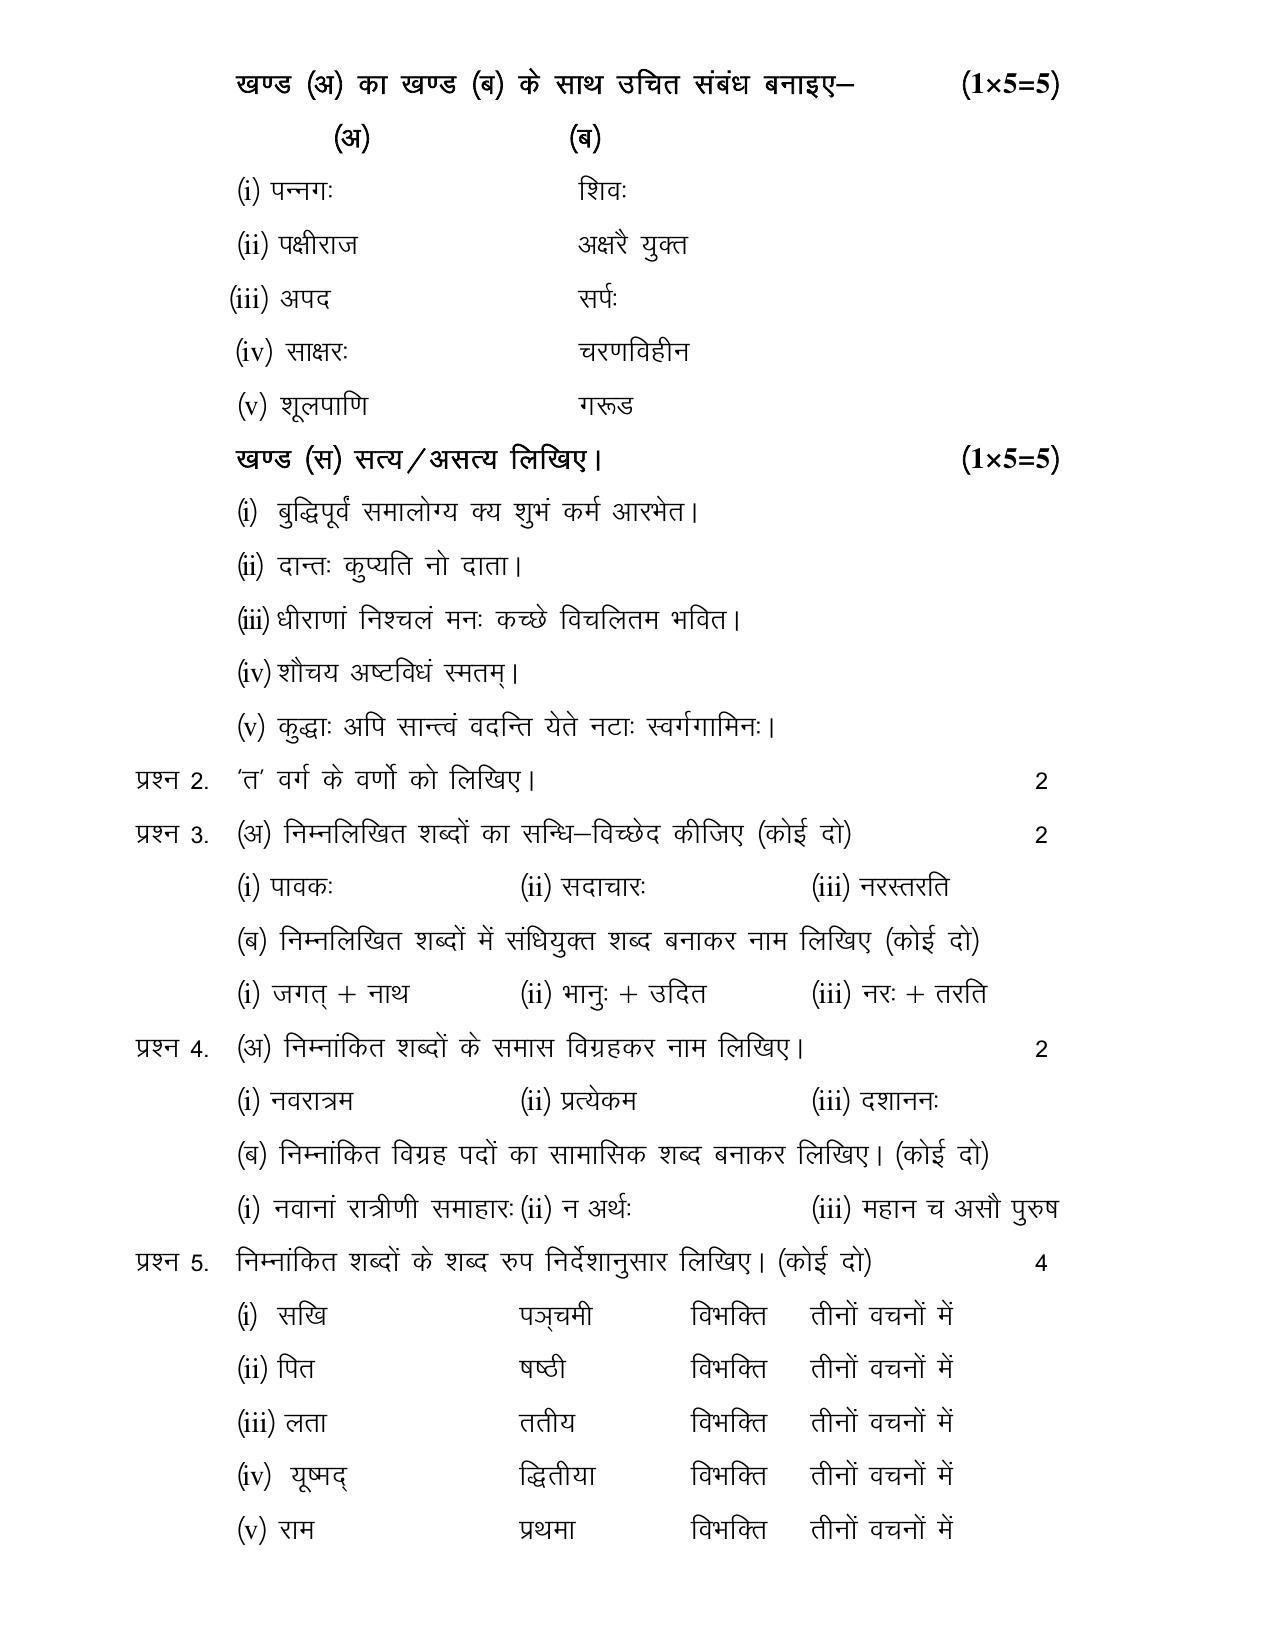 CGSOS Class 10th Model Question Paper - Sanskrit - II - Page 2